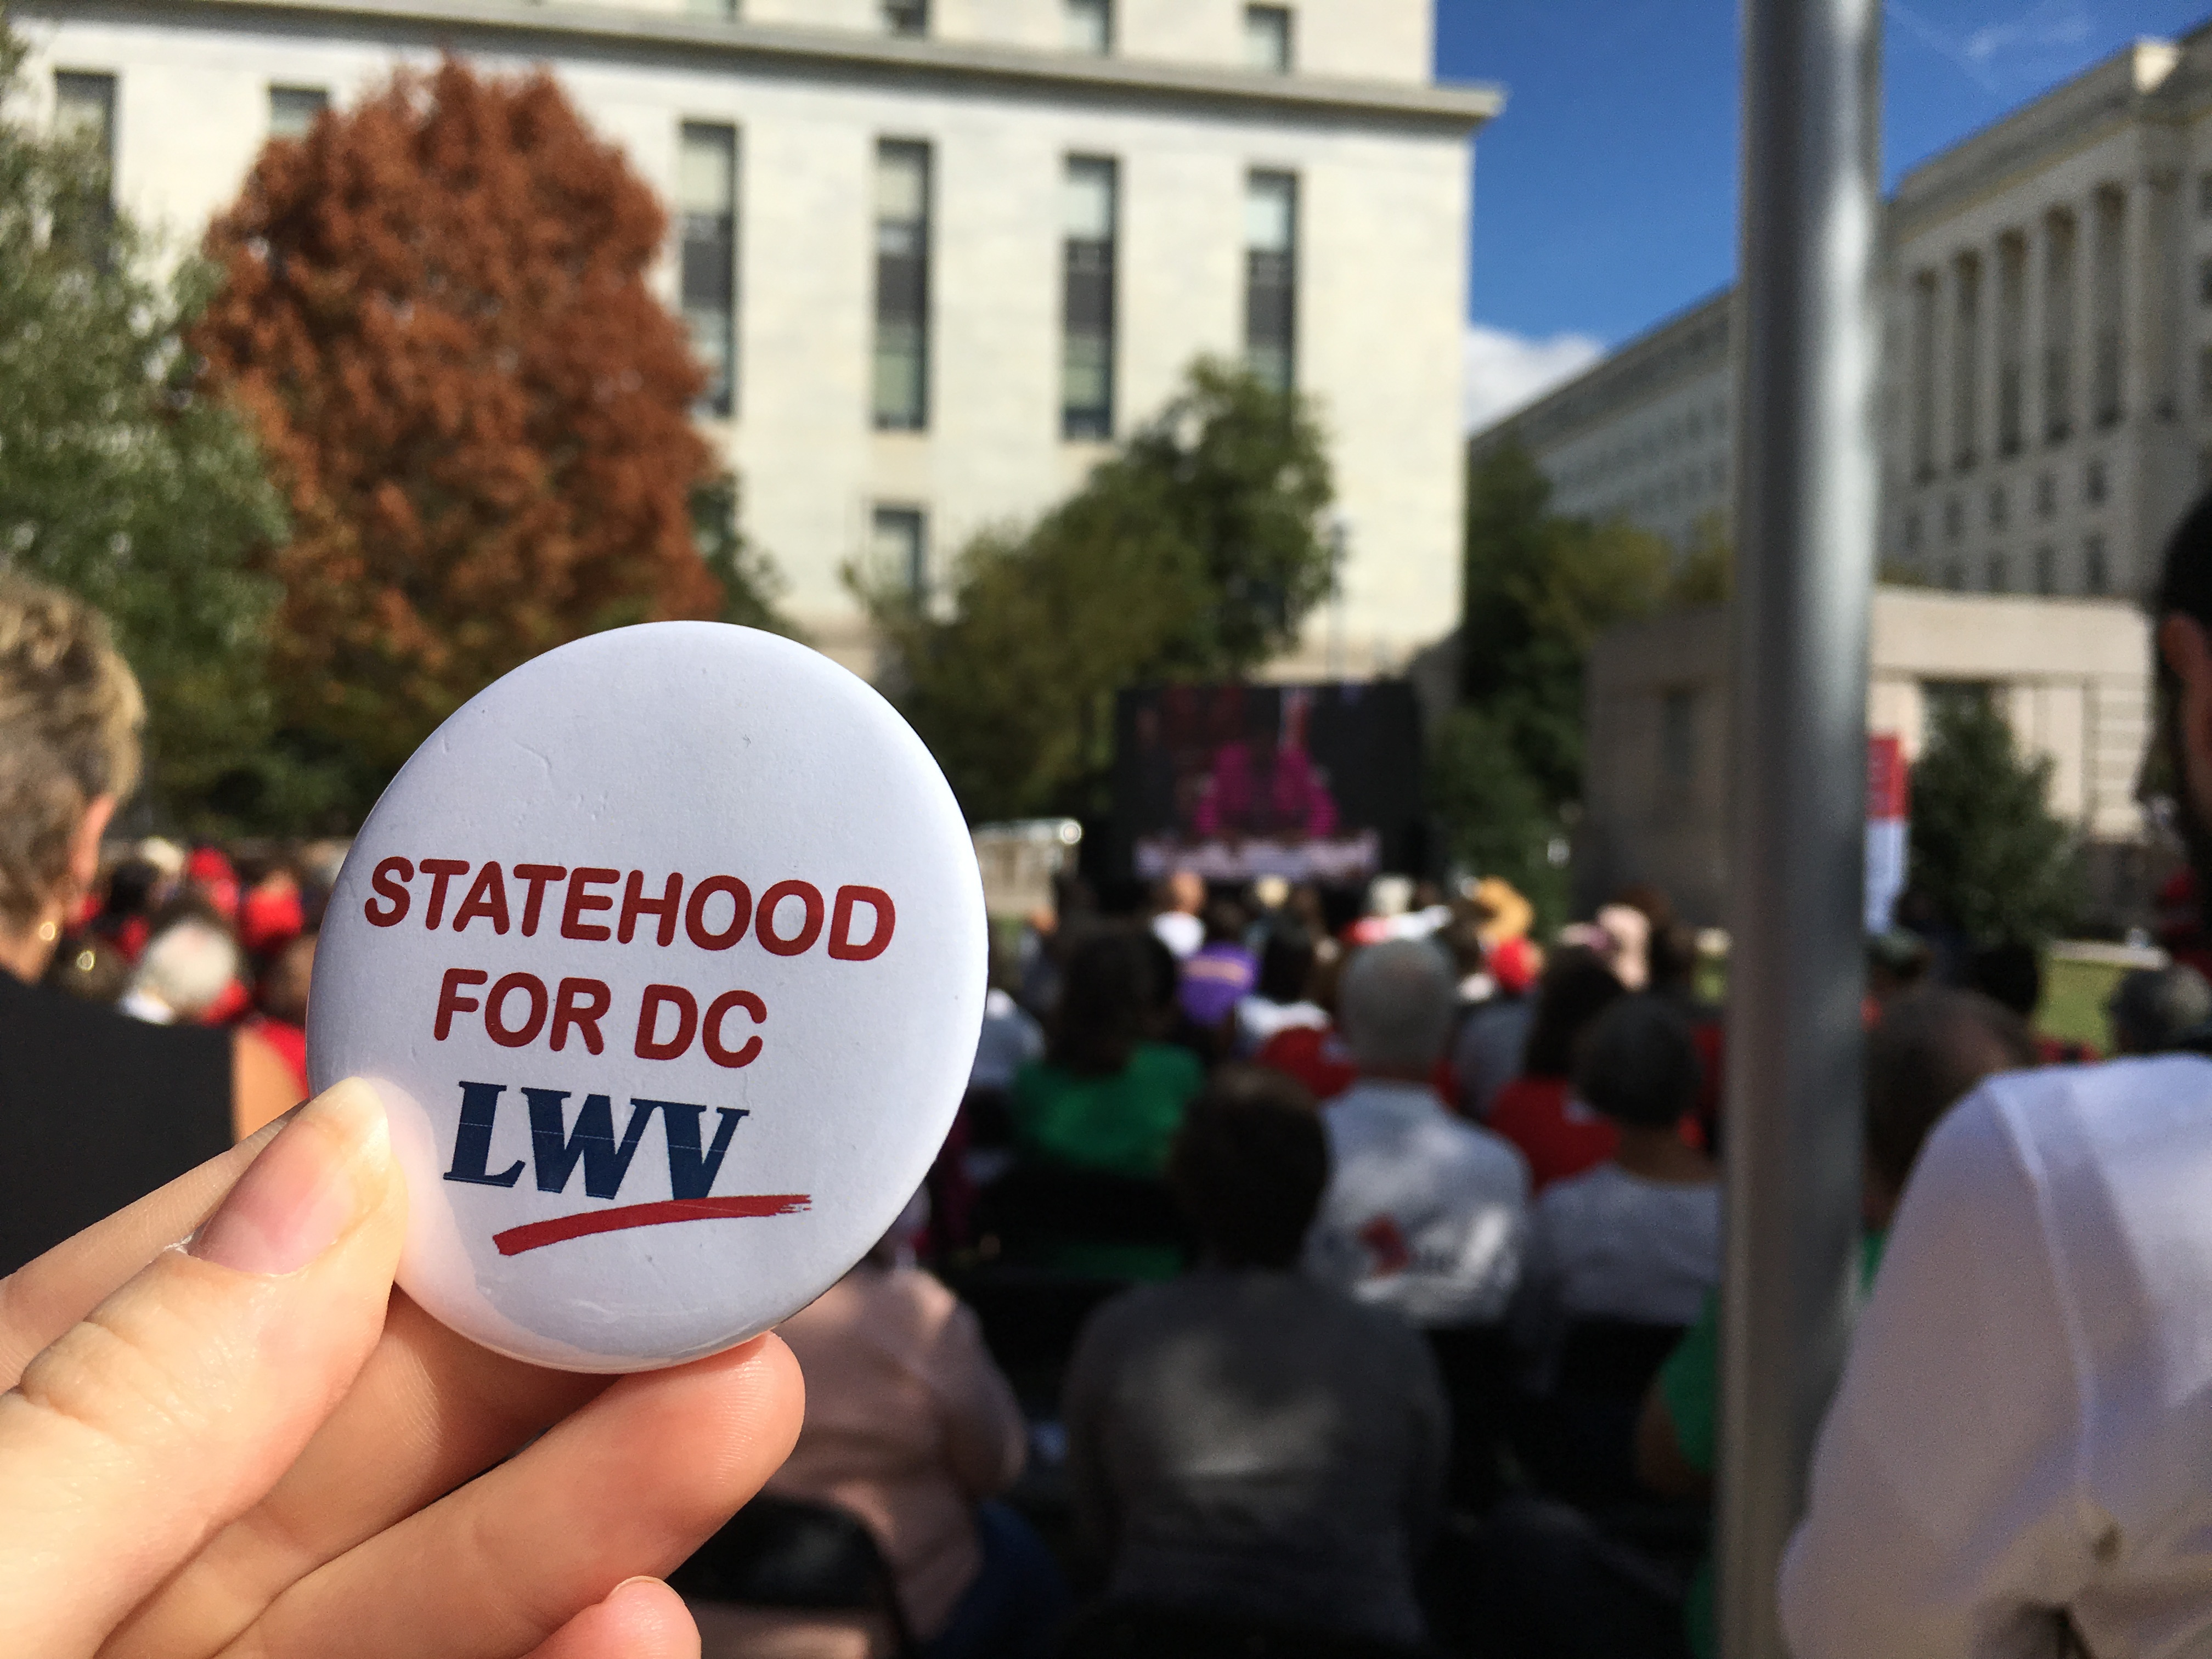 A person holding a button that says "Statehood for DC"